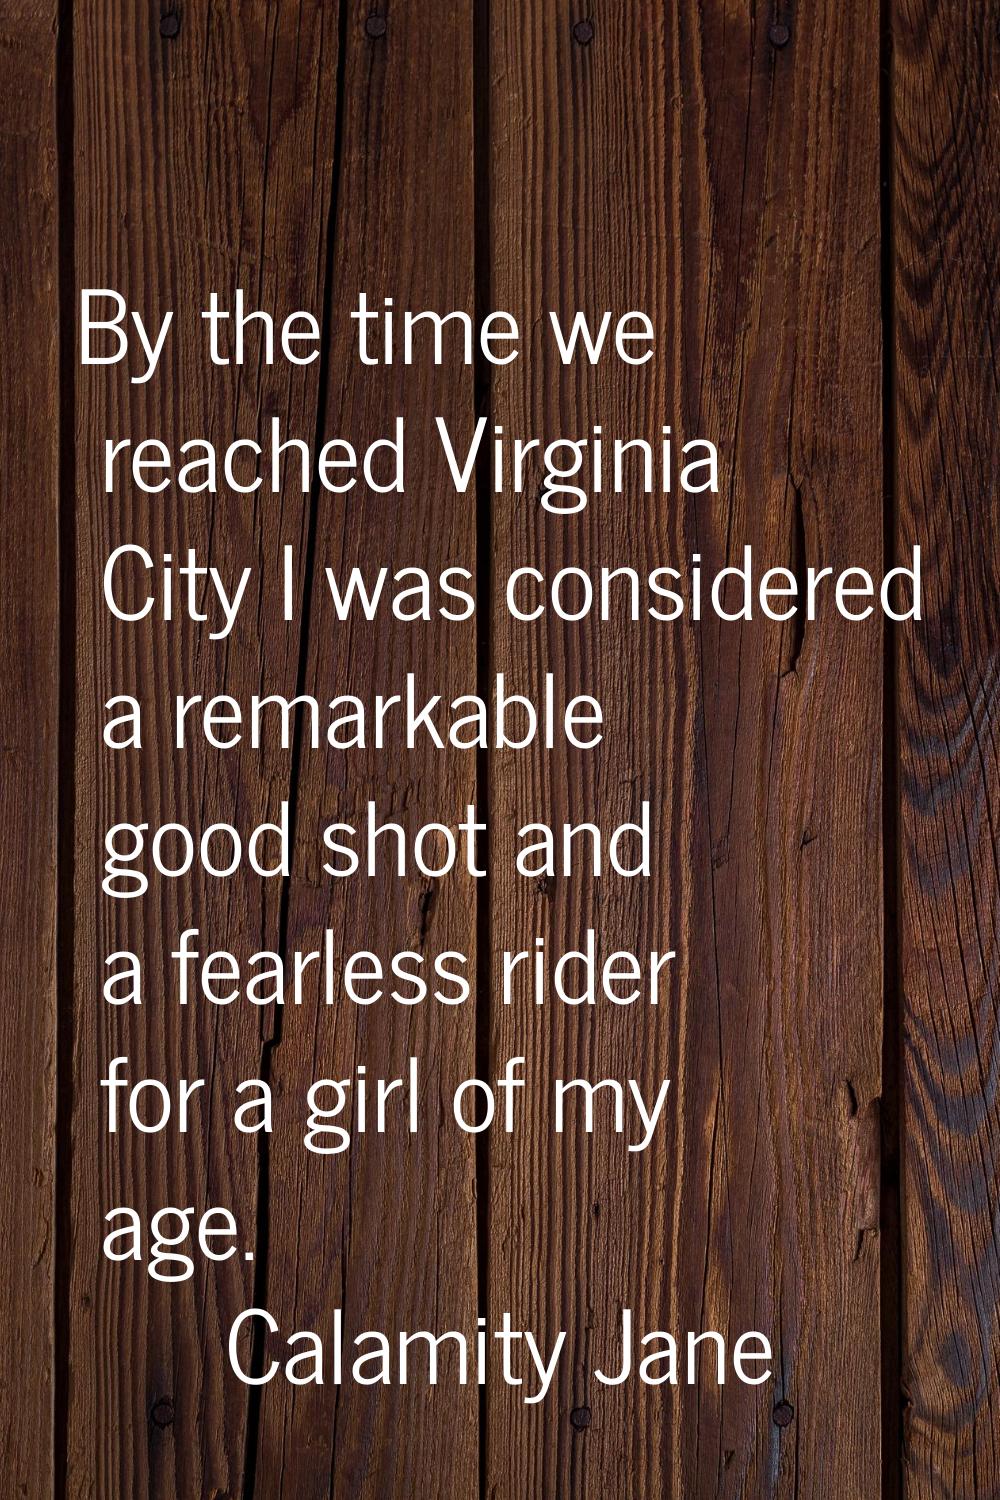 By the time we reached Virginia City I was considered a remarkable good shot and a fearless rider f